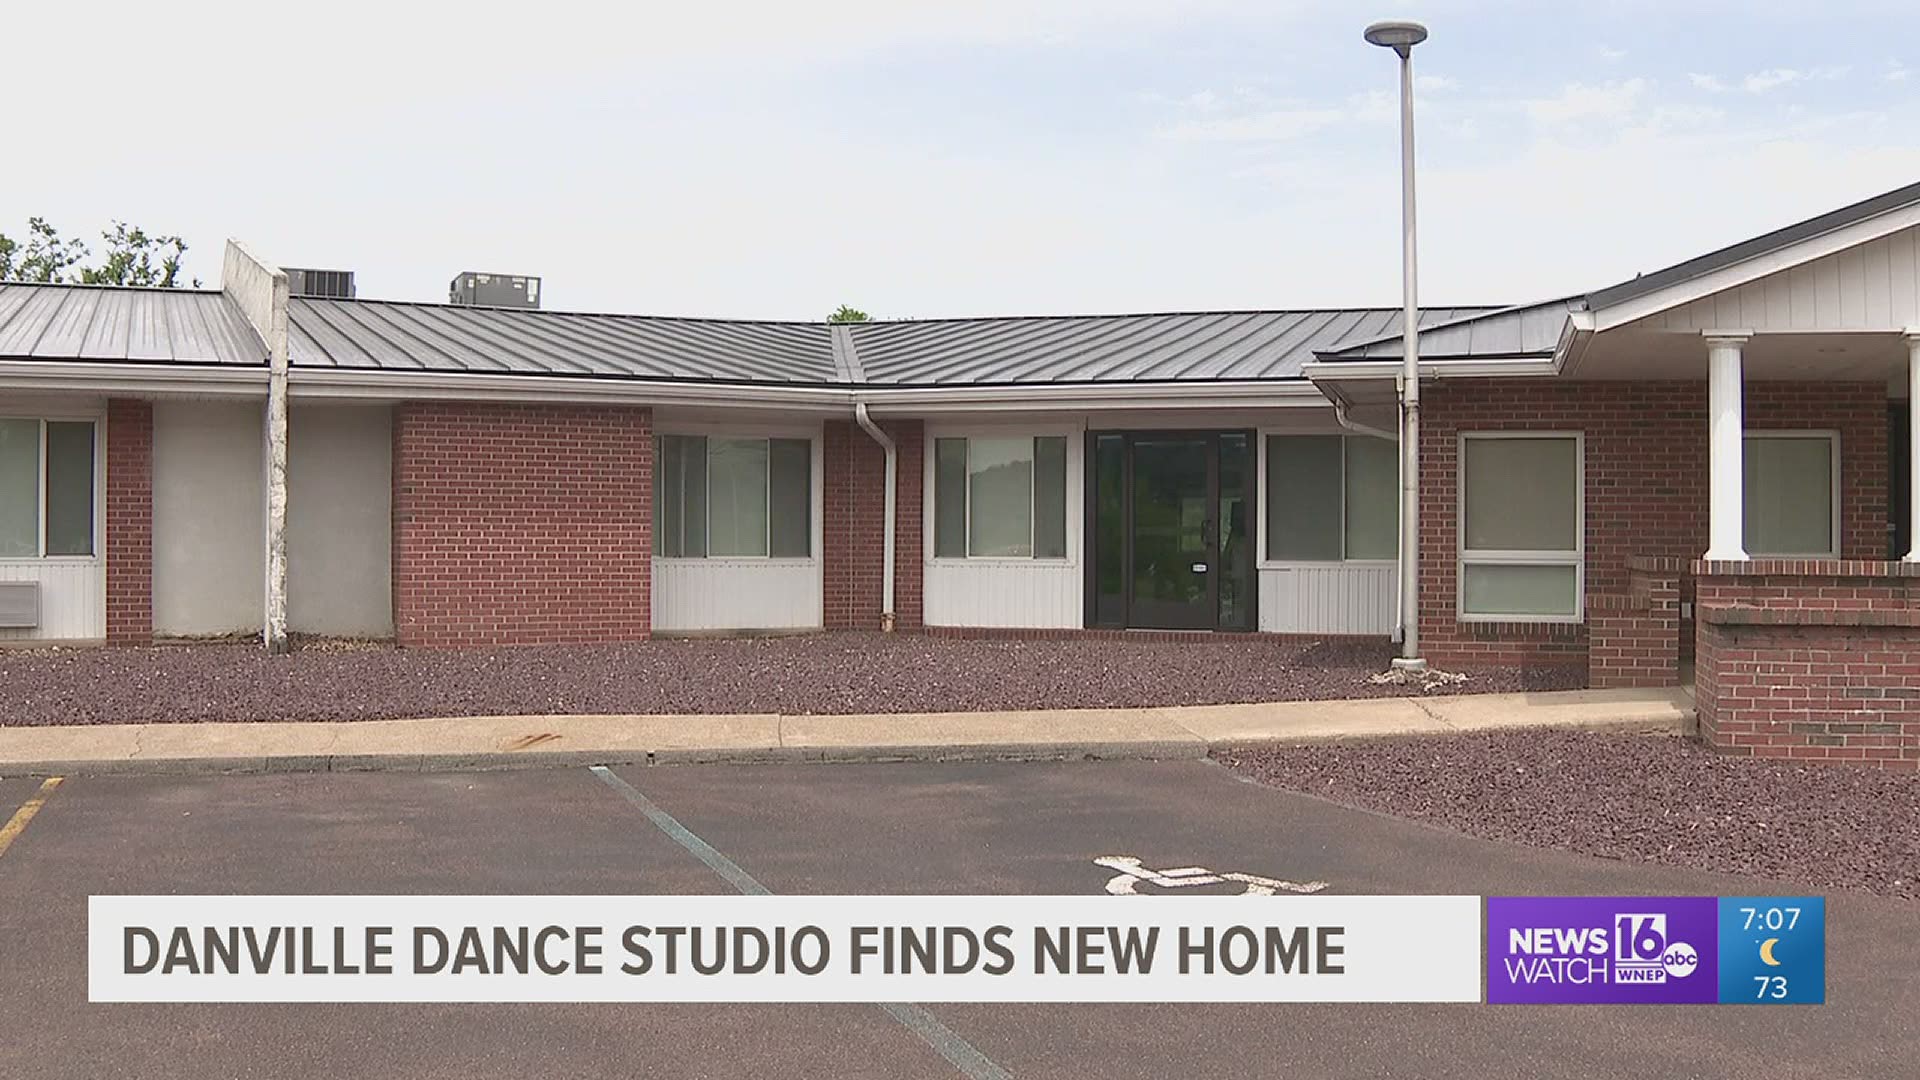 It's been a little over a week since a dance studio was destroyed by fire. The owner tells us because of the community's generosity, she already has a new space.